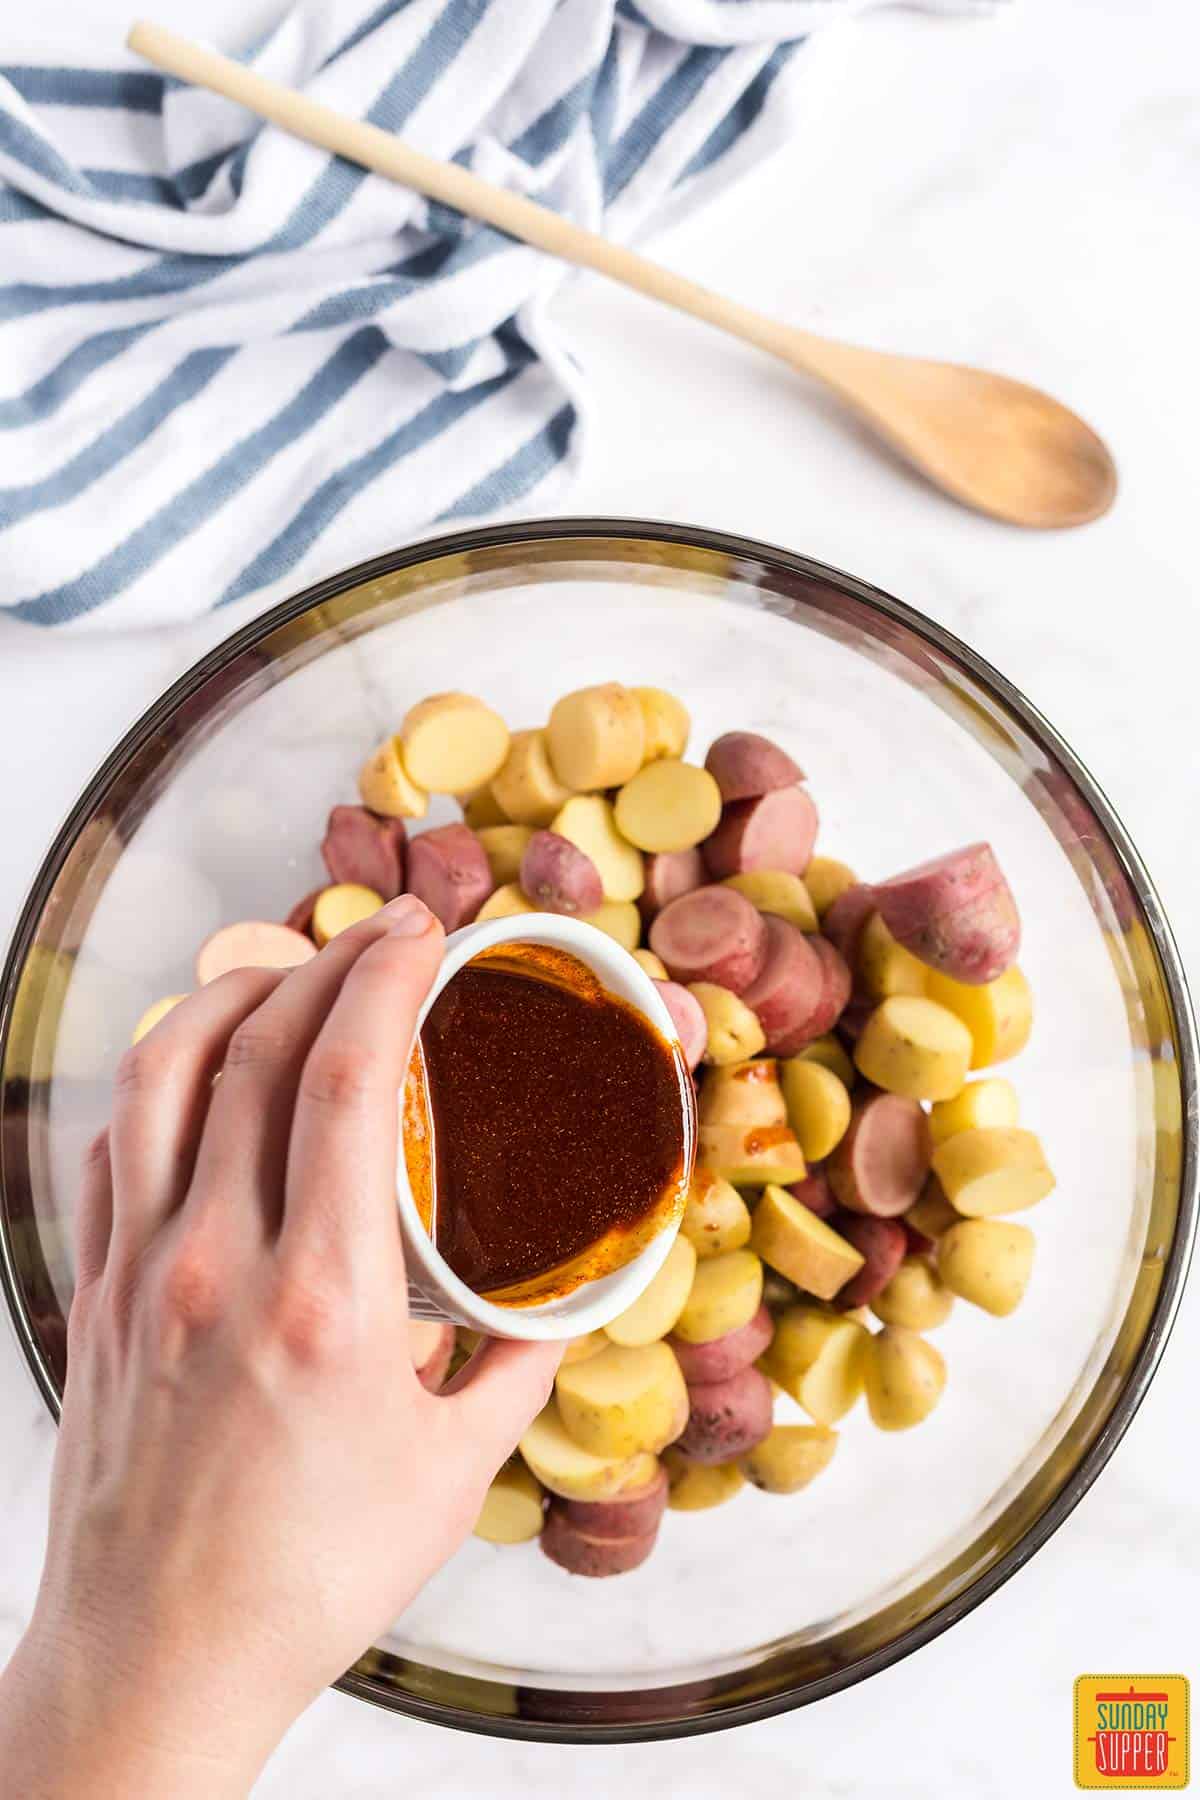 Pouring the sauce for Portuguese potatoes into a bowl of fingerling potatoes